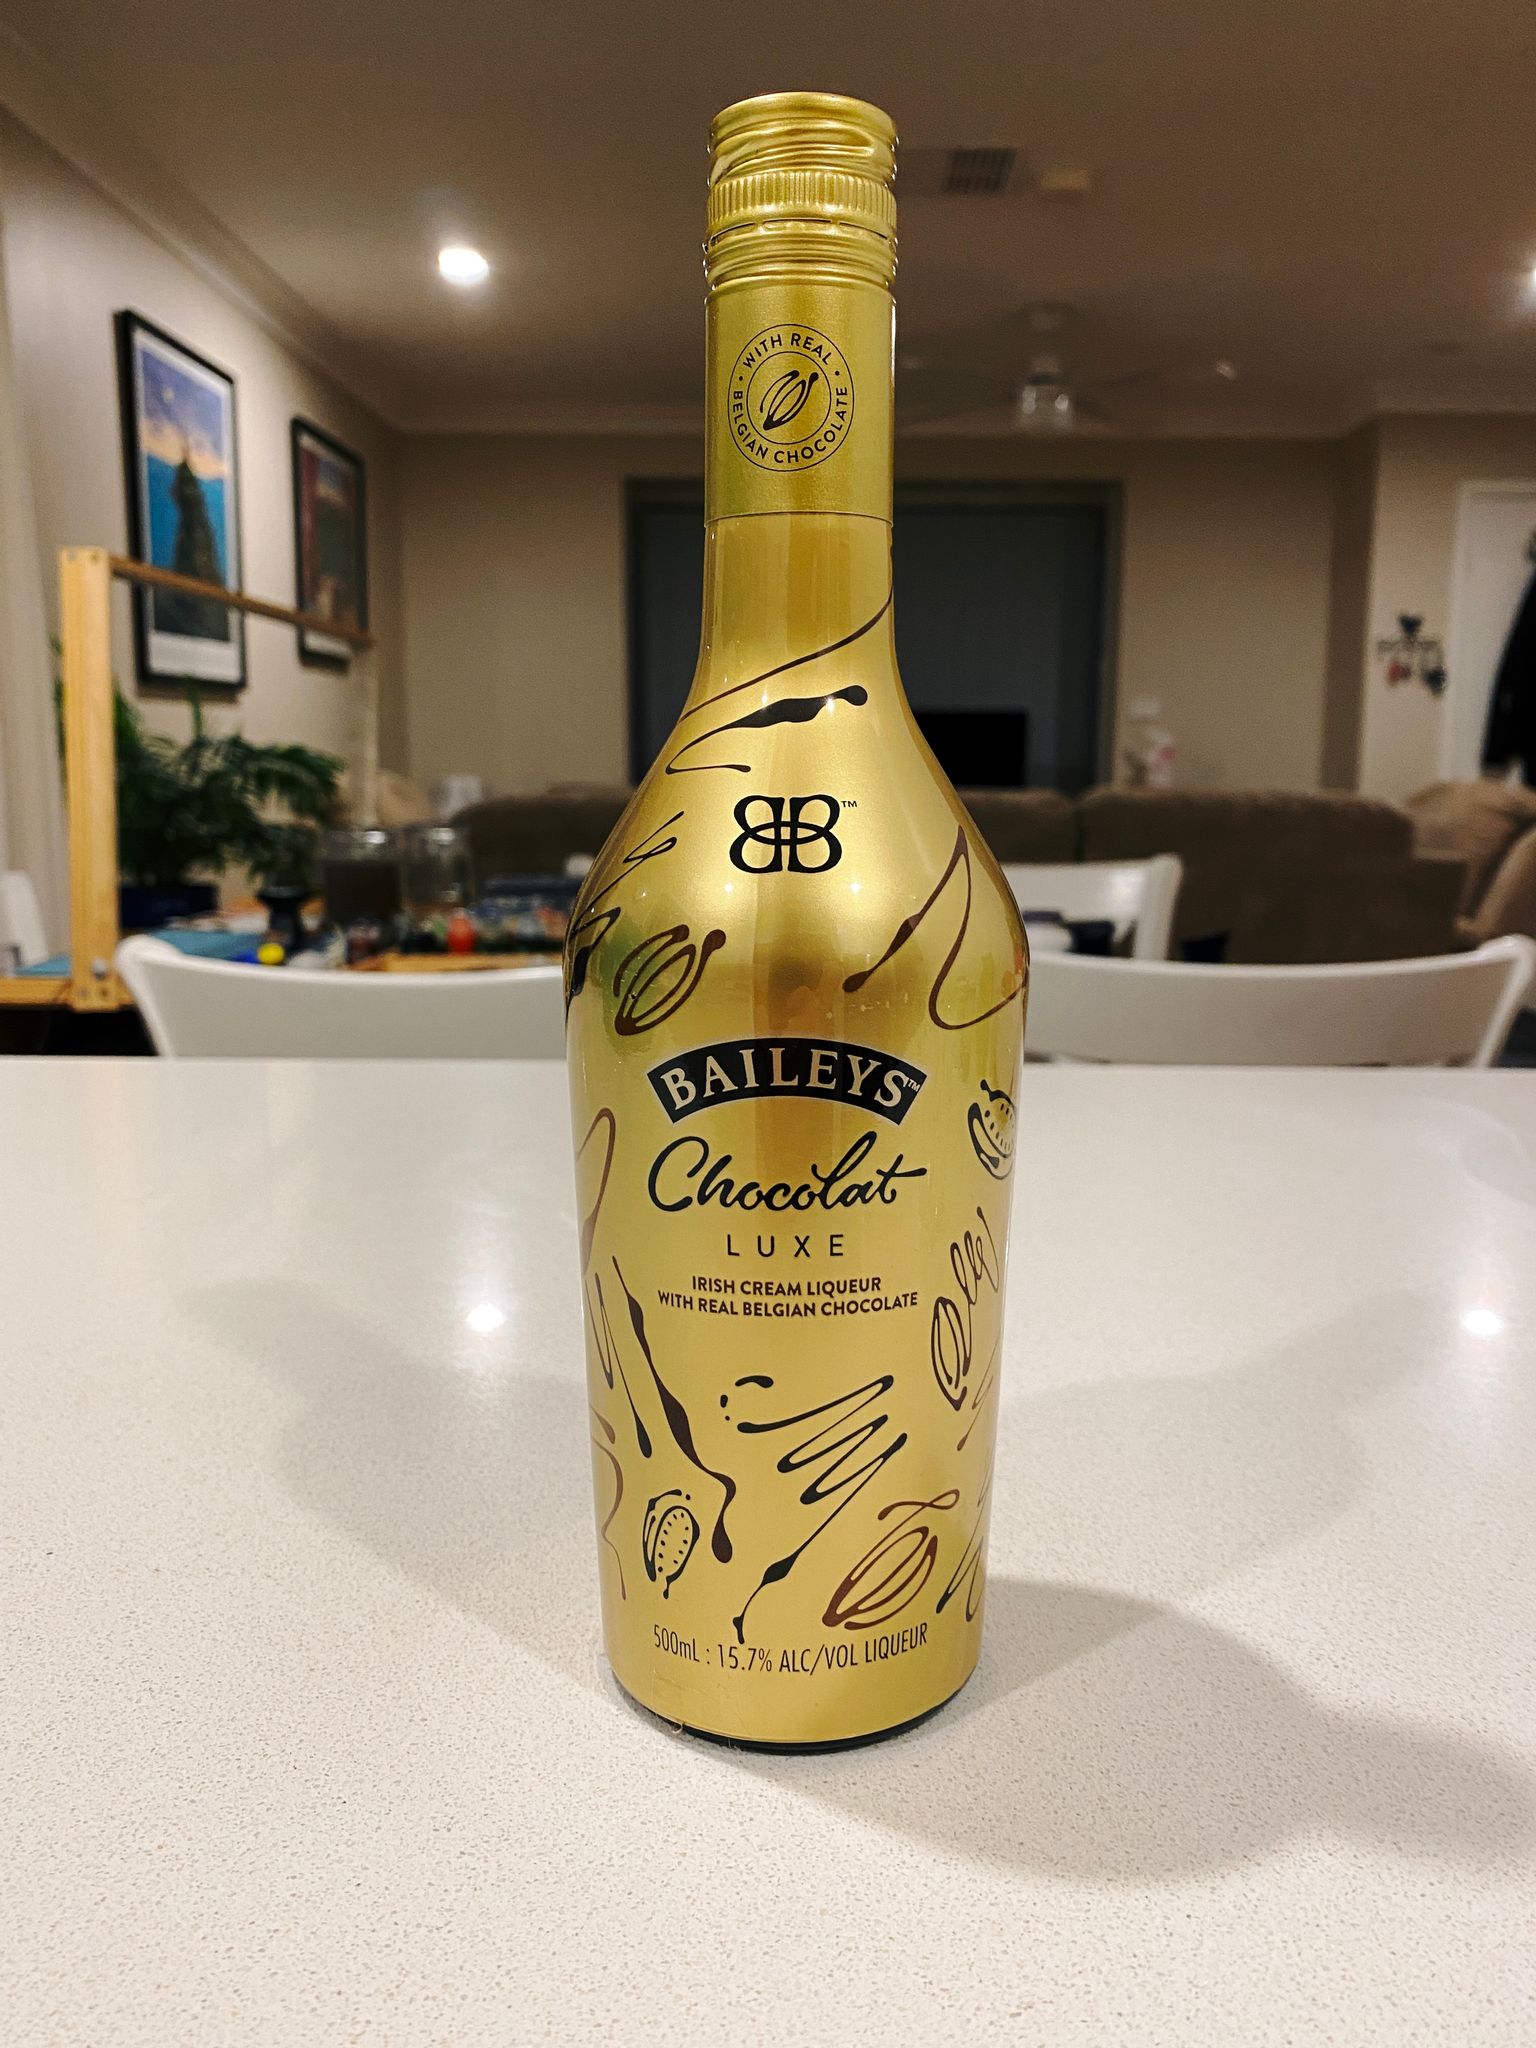 A photo of a bottle of Baileys "Chocolate Lux". It's Baileys Irish Cream with Belgian chocolate in it.